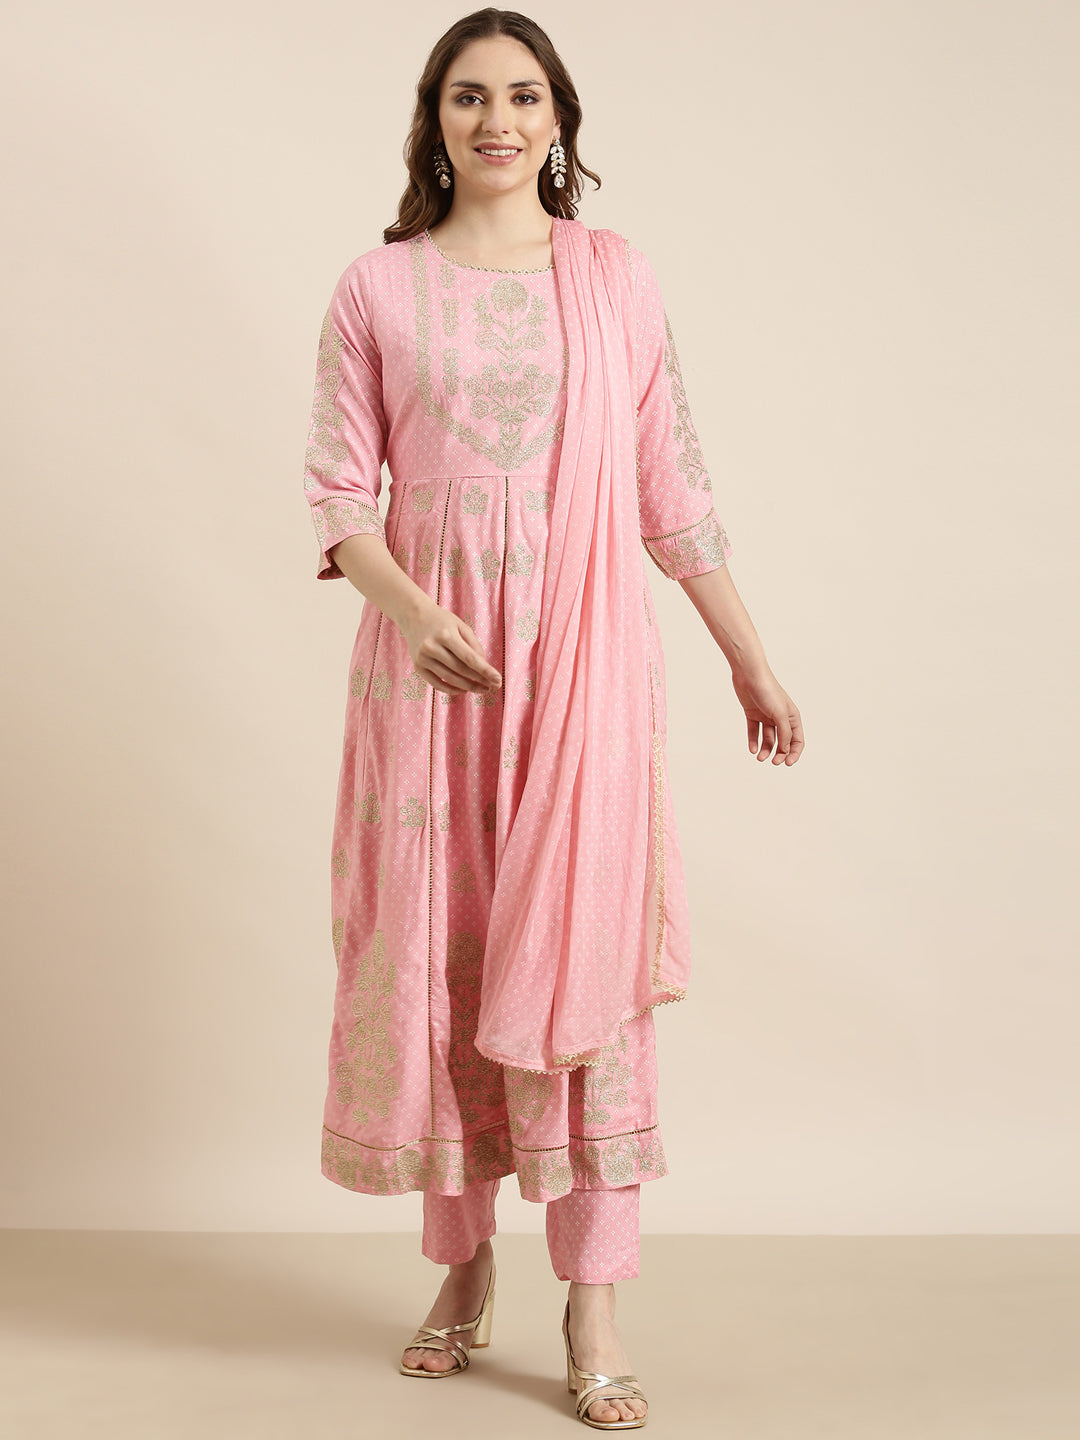 Women Anarkali Pink Floral Kurta and Trousers Set Comes With Dupatta and Potli Bag